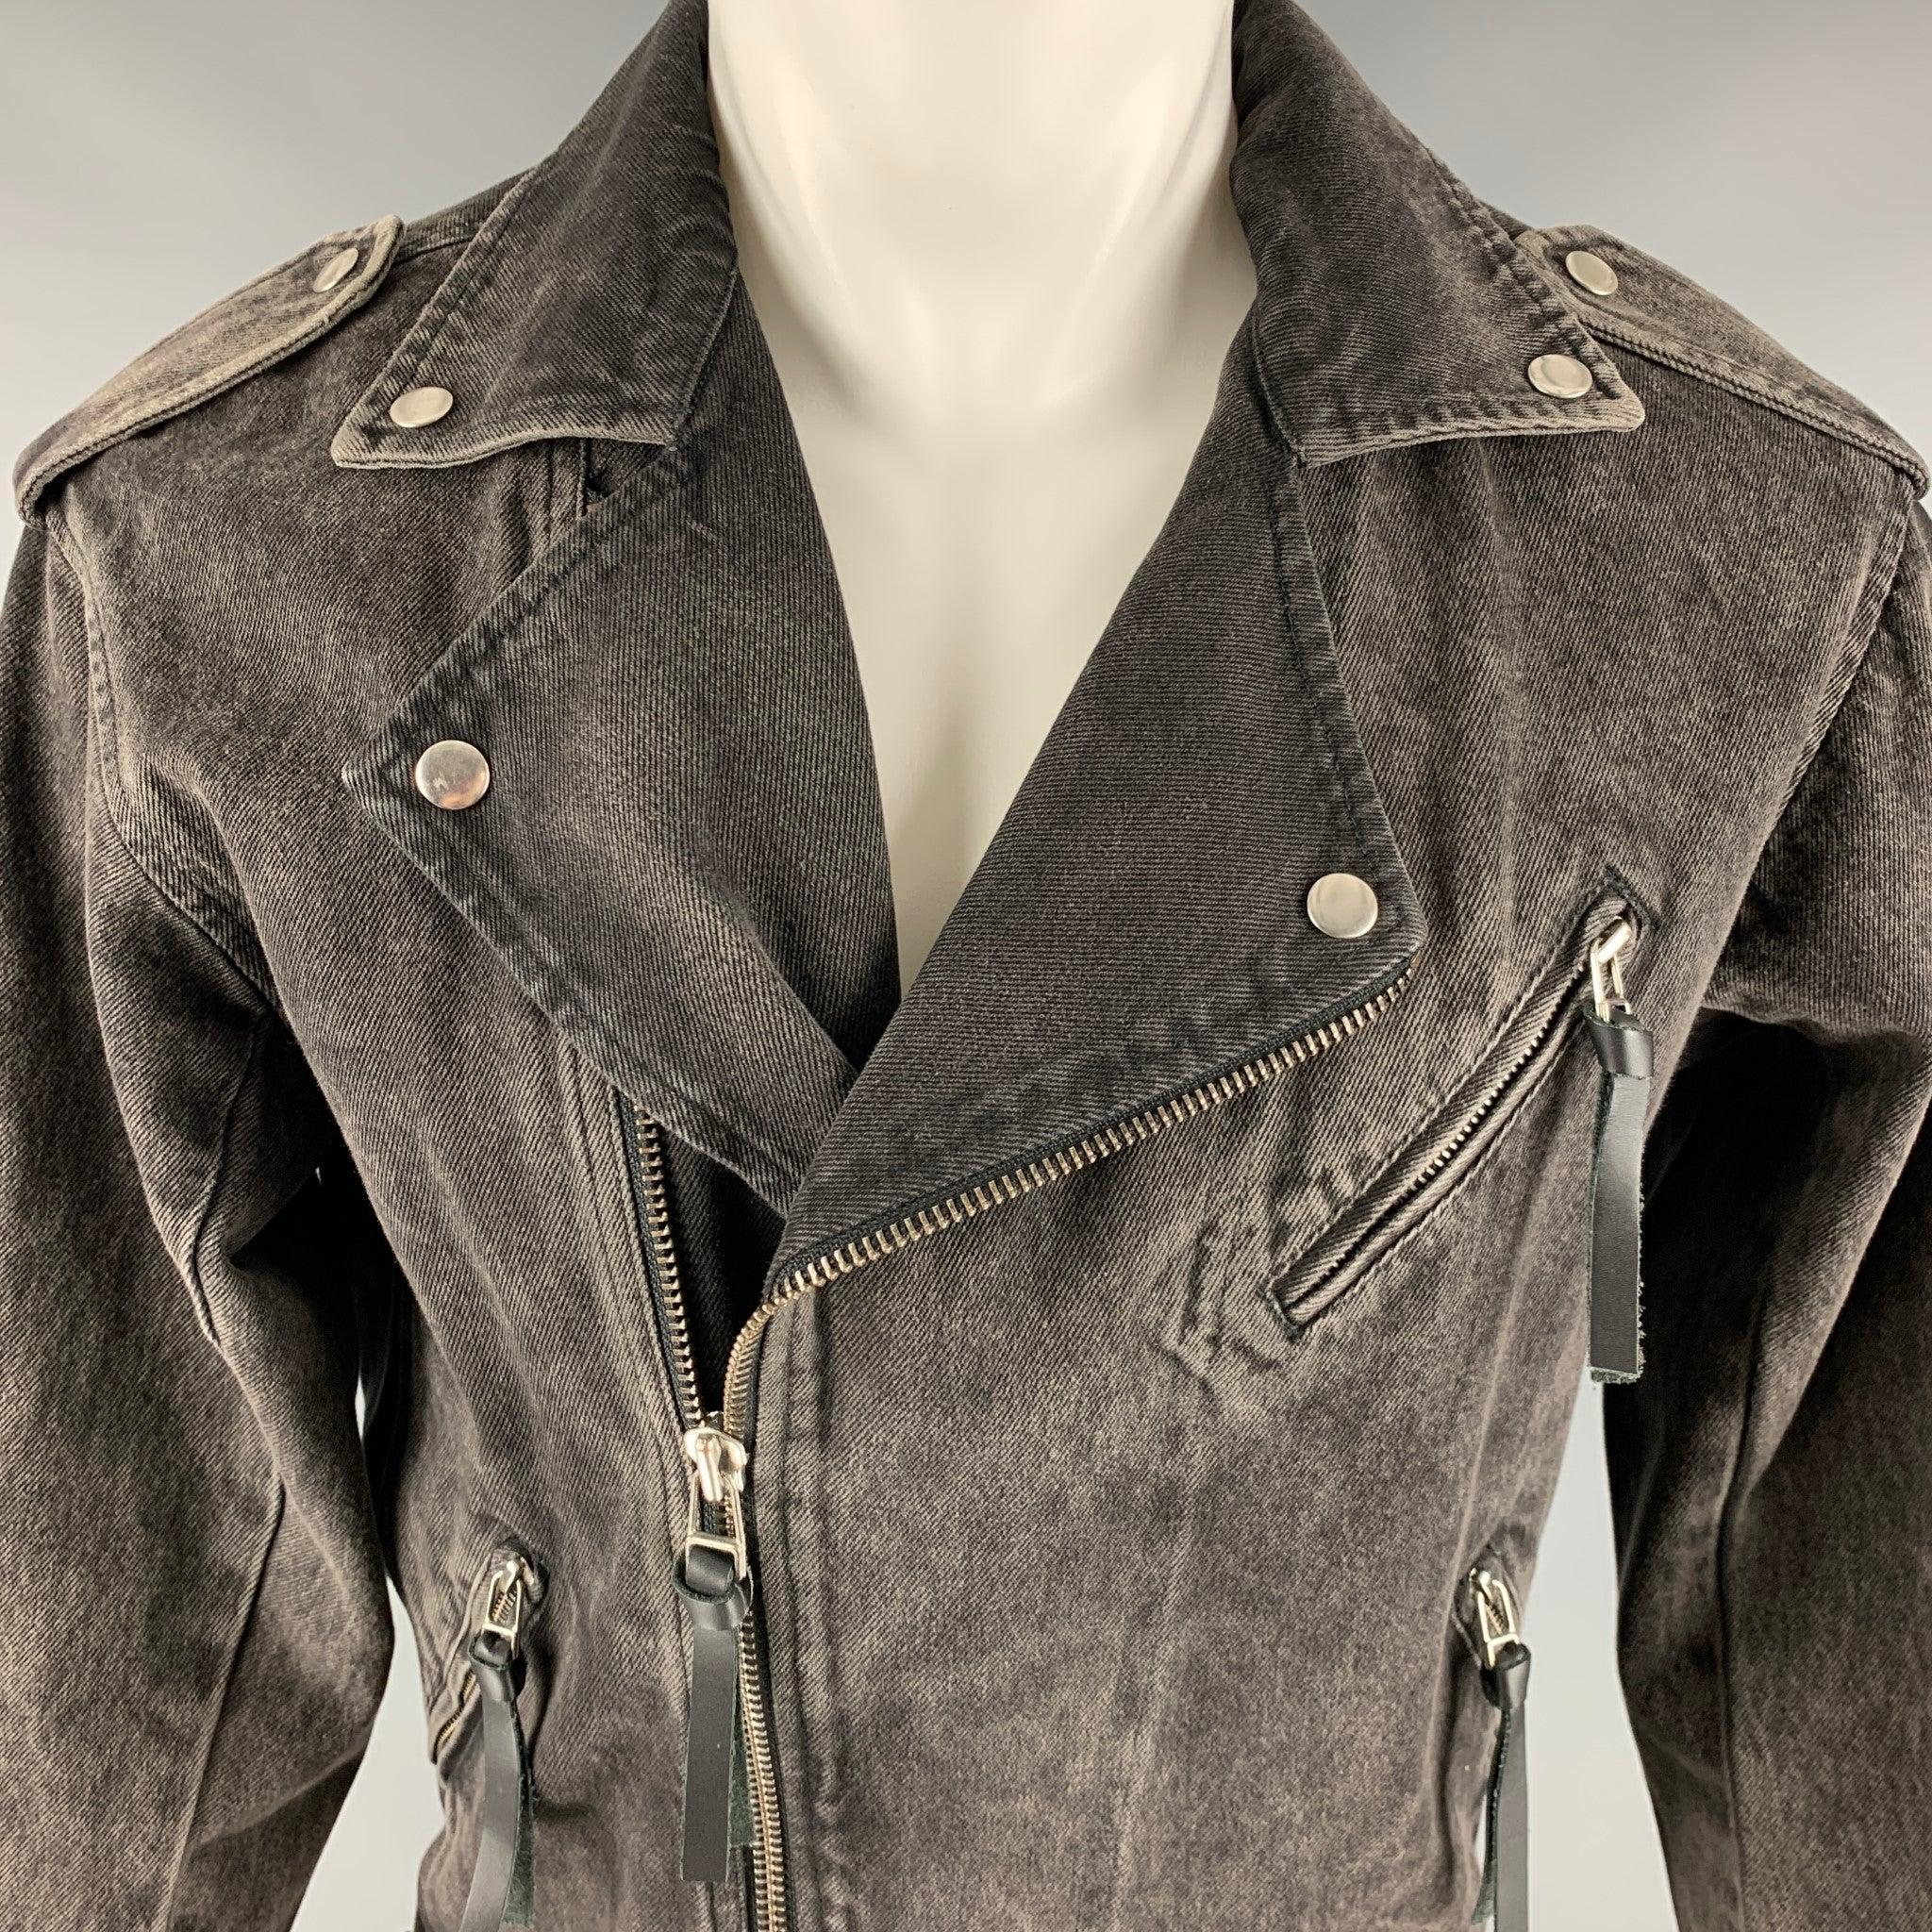 THE KOOPLES jacket
in a black denim featuring beaded back design, biker style, leather zipper pulls, and zip up closure.Very Good Pre-Owned Condition. Missing some crystal embellishments on back. 

Marked:   1 

Measurements: 
 
Shoulder: 17.5